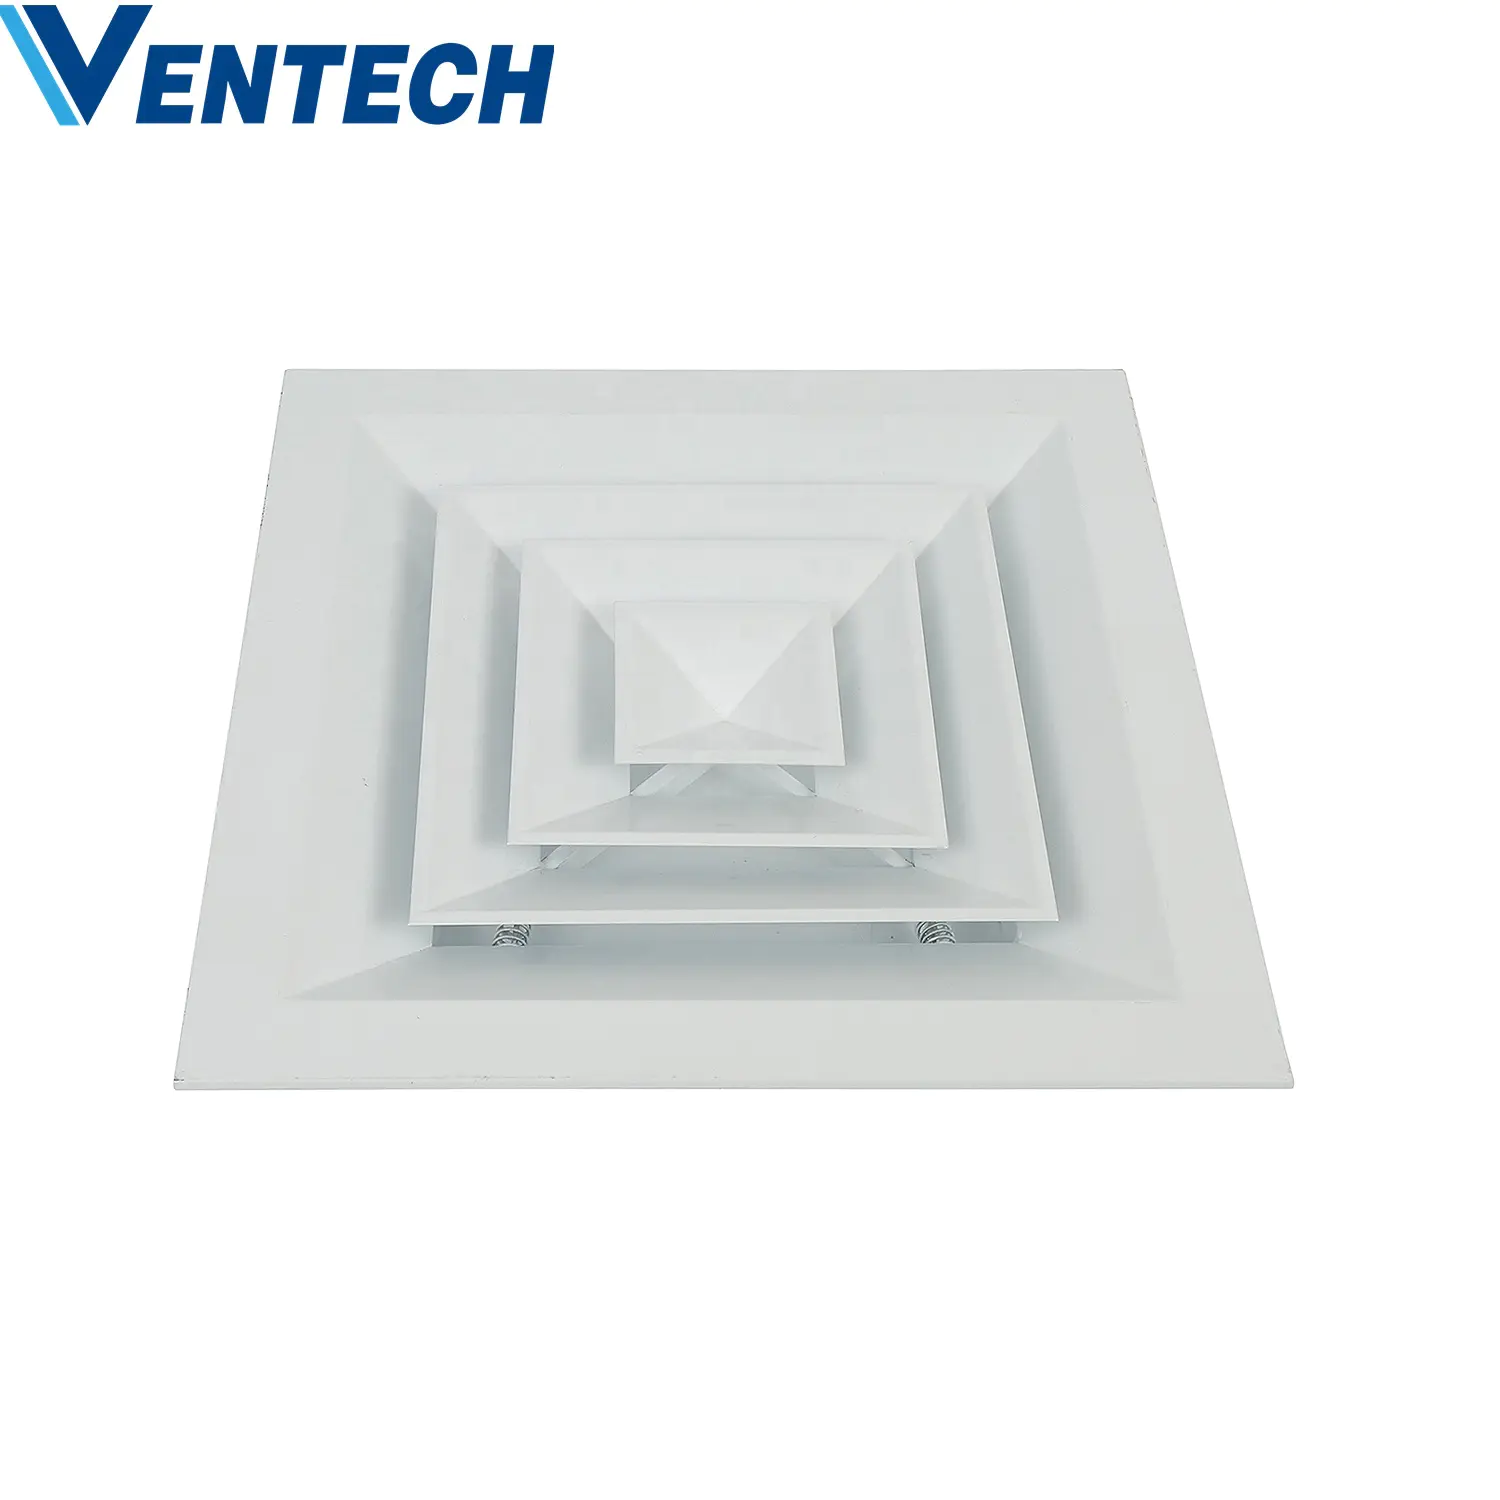 Hvac System VENTECH Air Duct Vent Aluminum China Outlet Removable Square Air Ceiling Diffusers